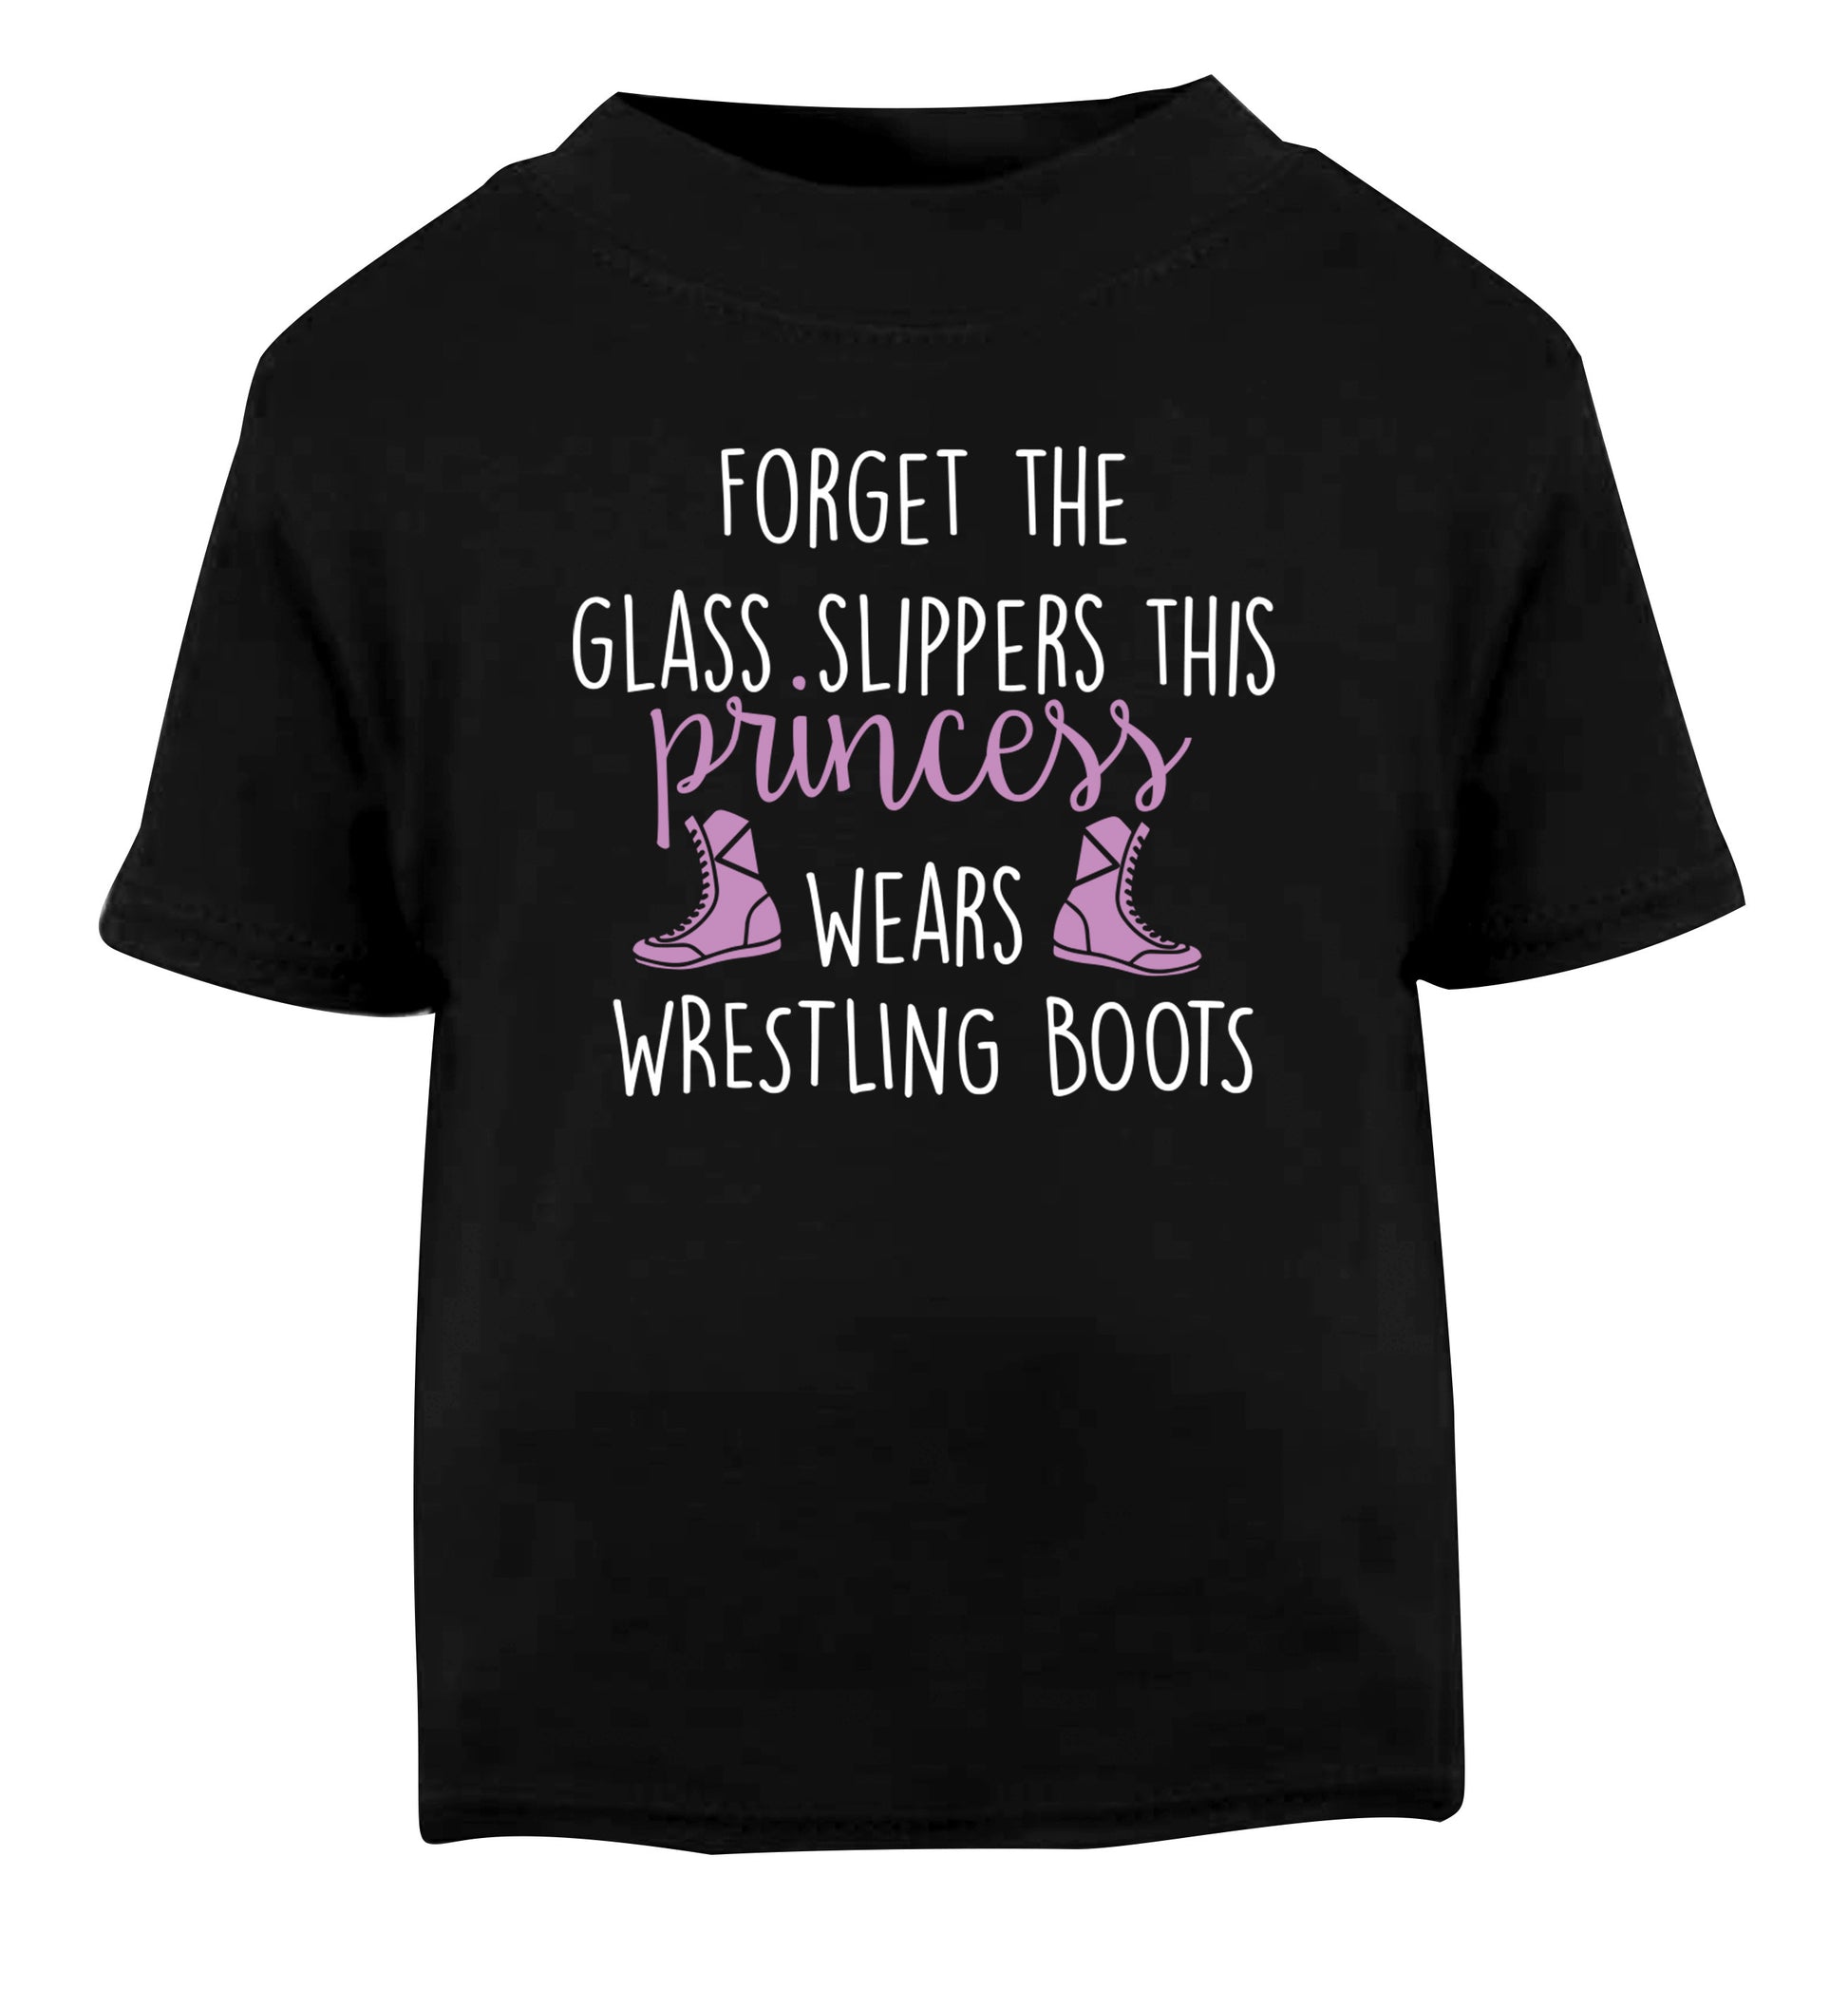 Forget the glass slippers this princess wears wrestling boots Black Baby Toddler Tshirt 2 years